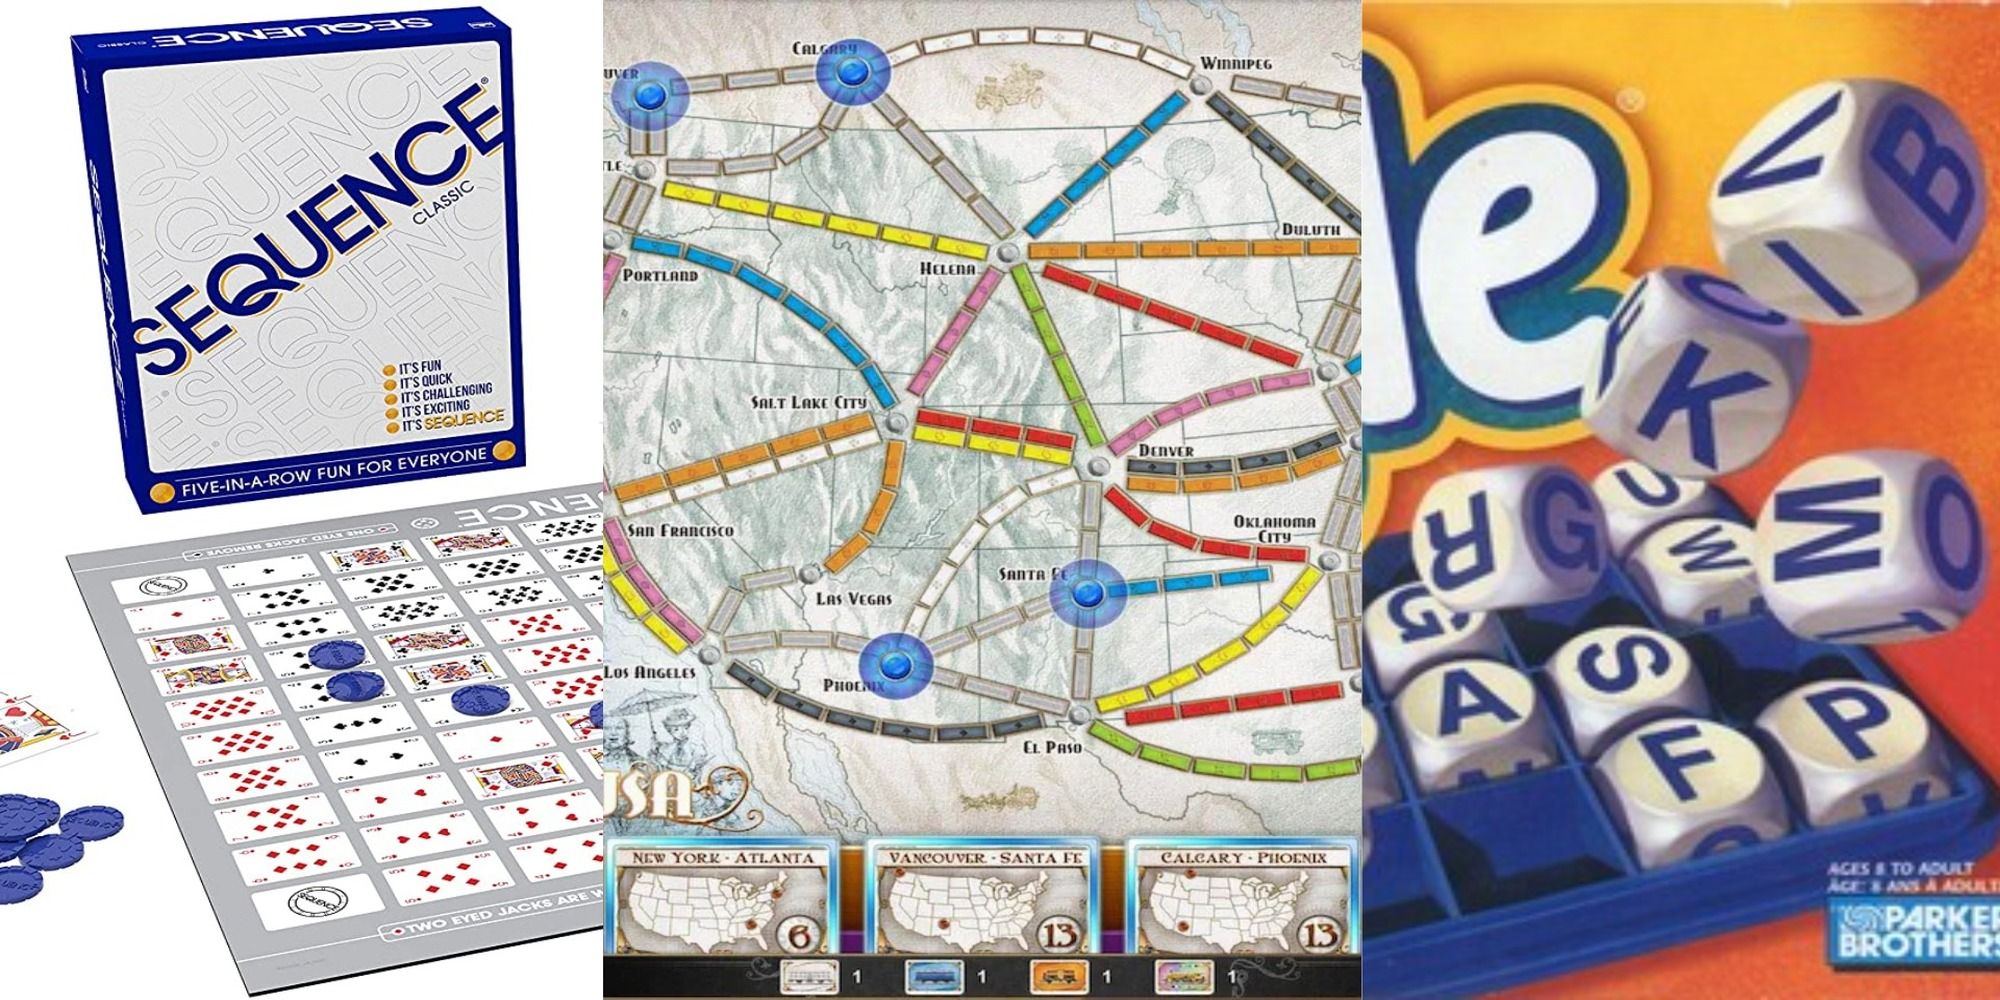 title image board games like connect 4 sequence boggle ticket to ride